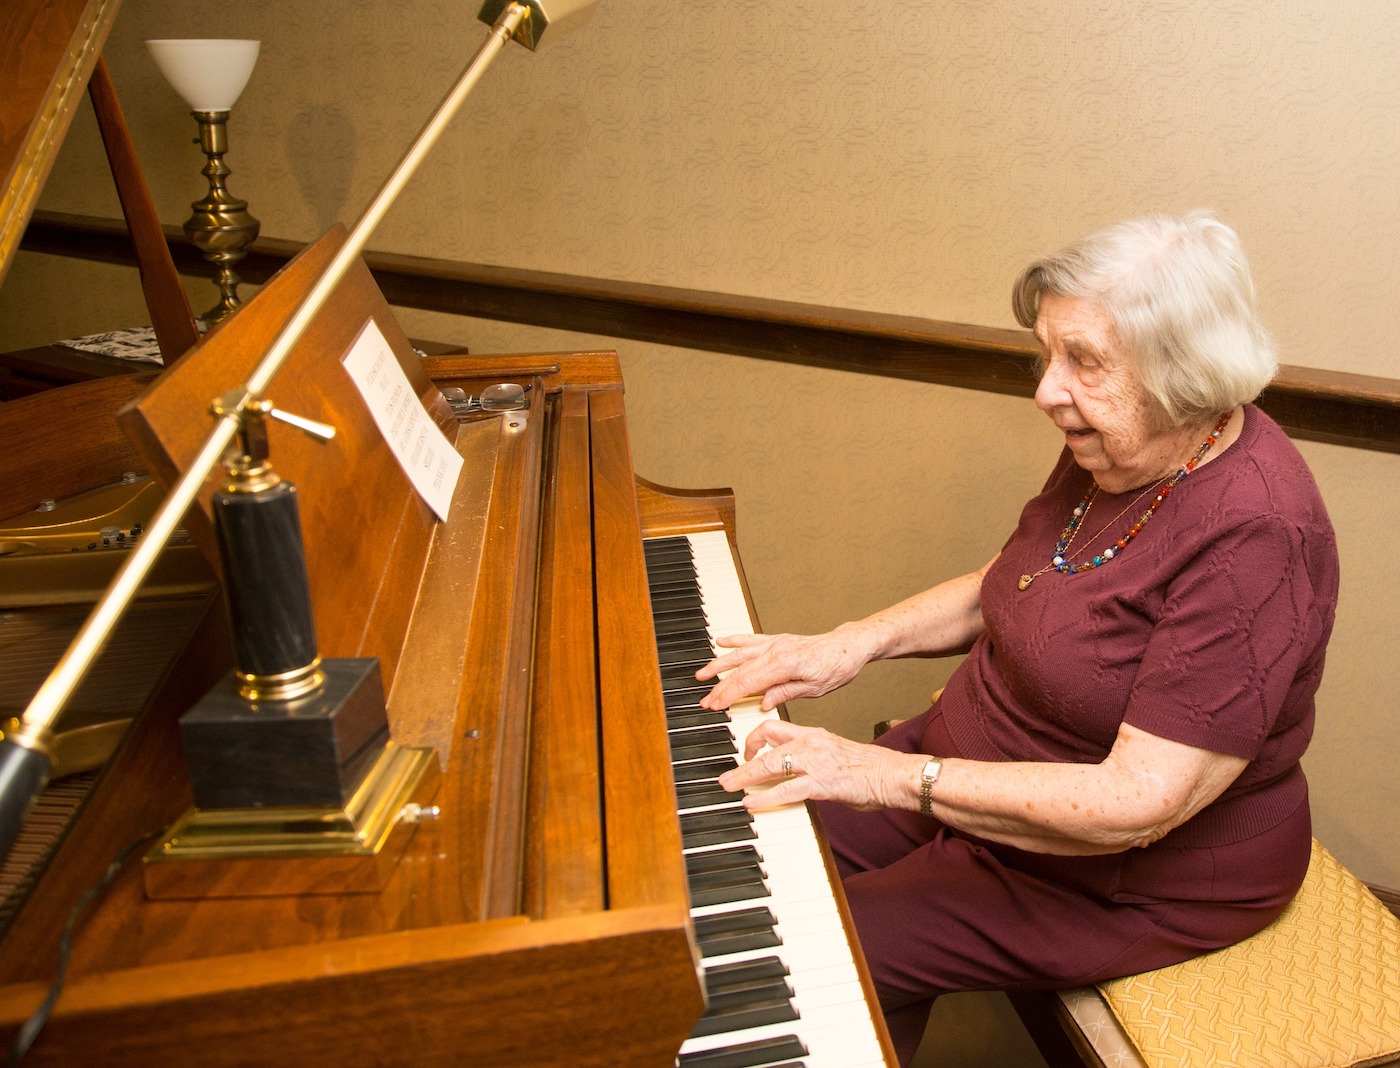 A senior woman wearing a red shirt playing a grand piano